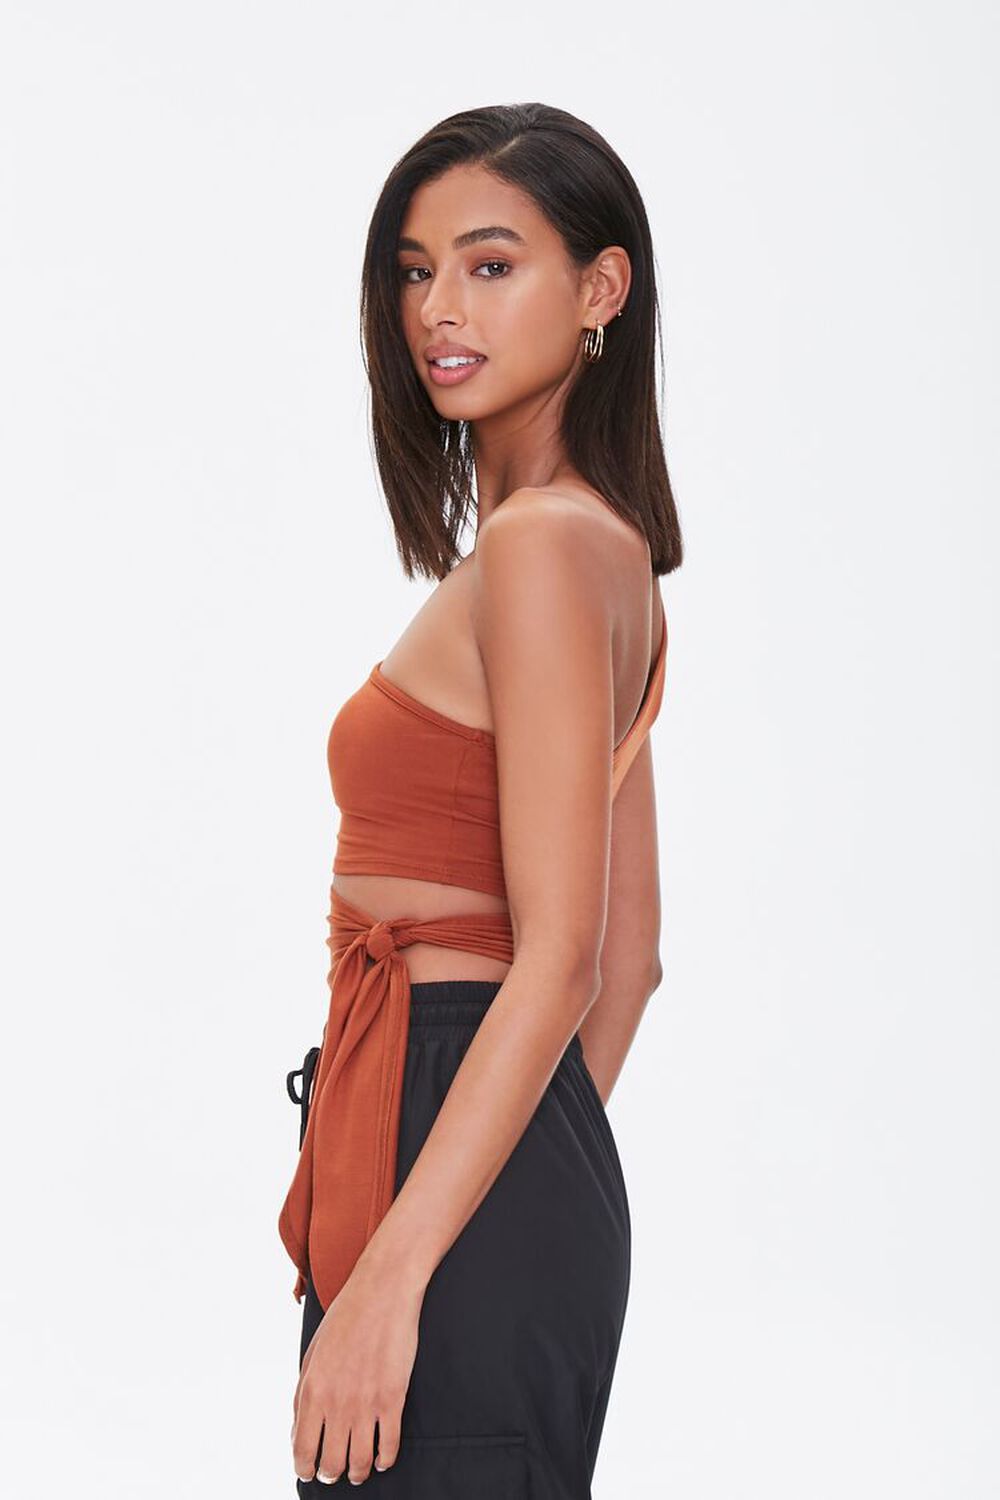 COCOA One-Shoulder Cutout Top, image 2